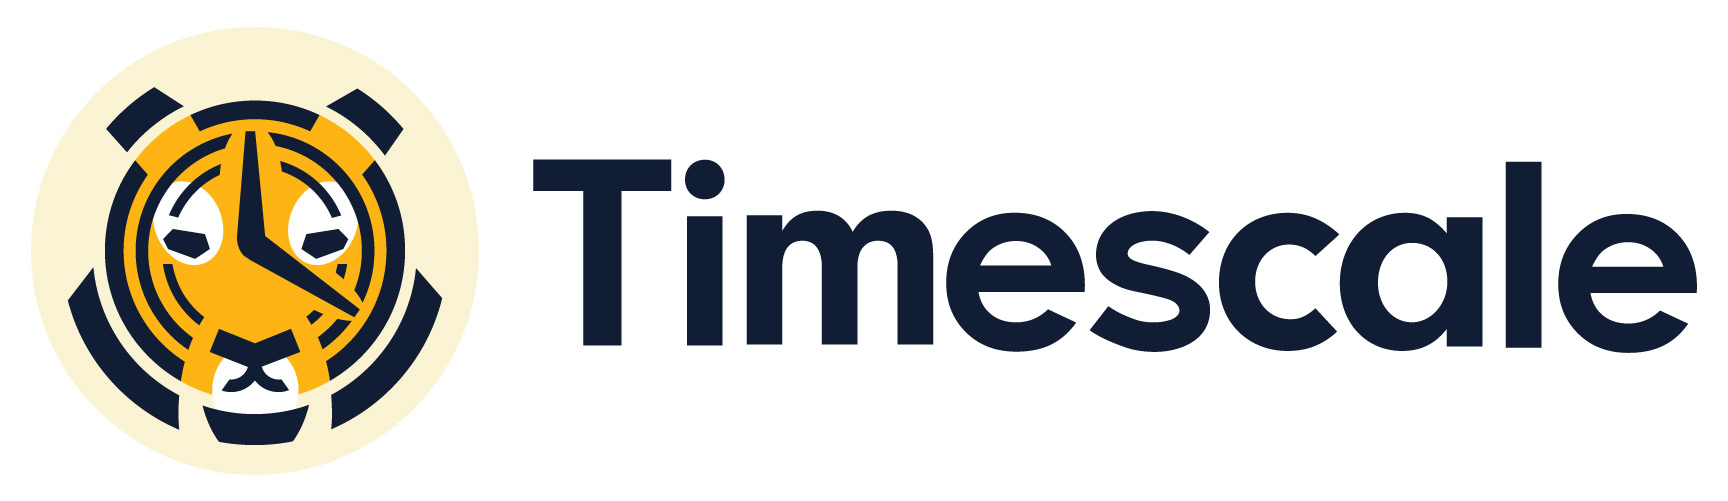 Design jobs at Timescale